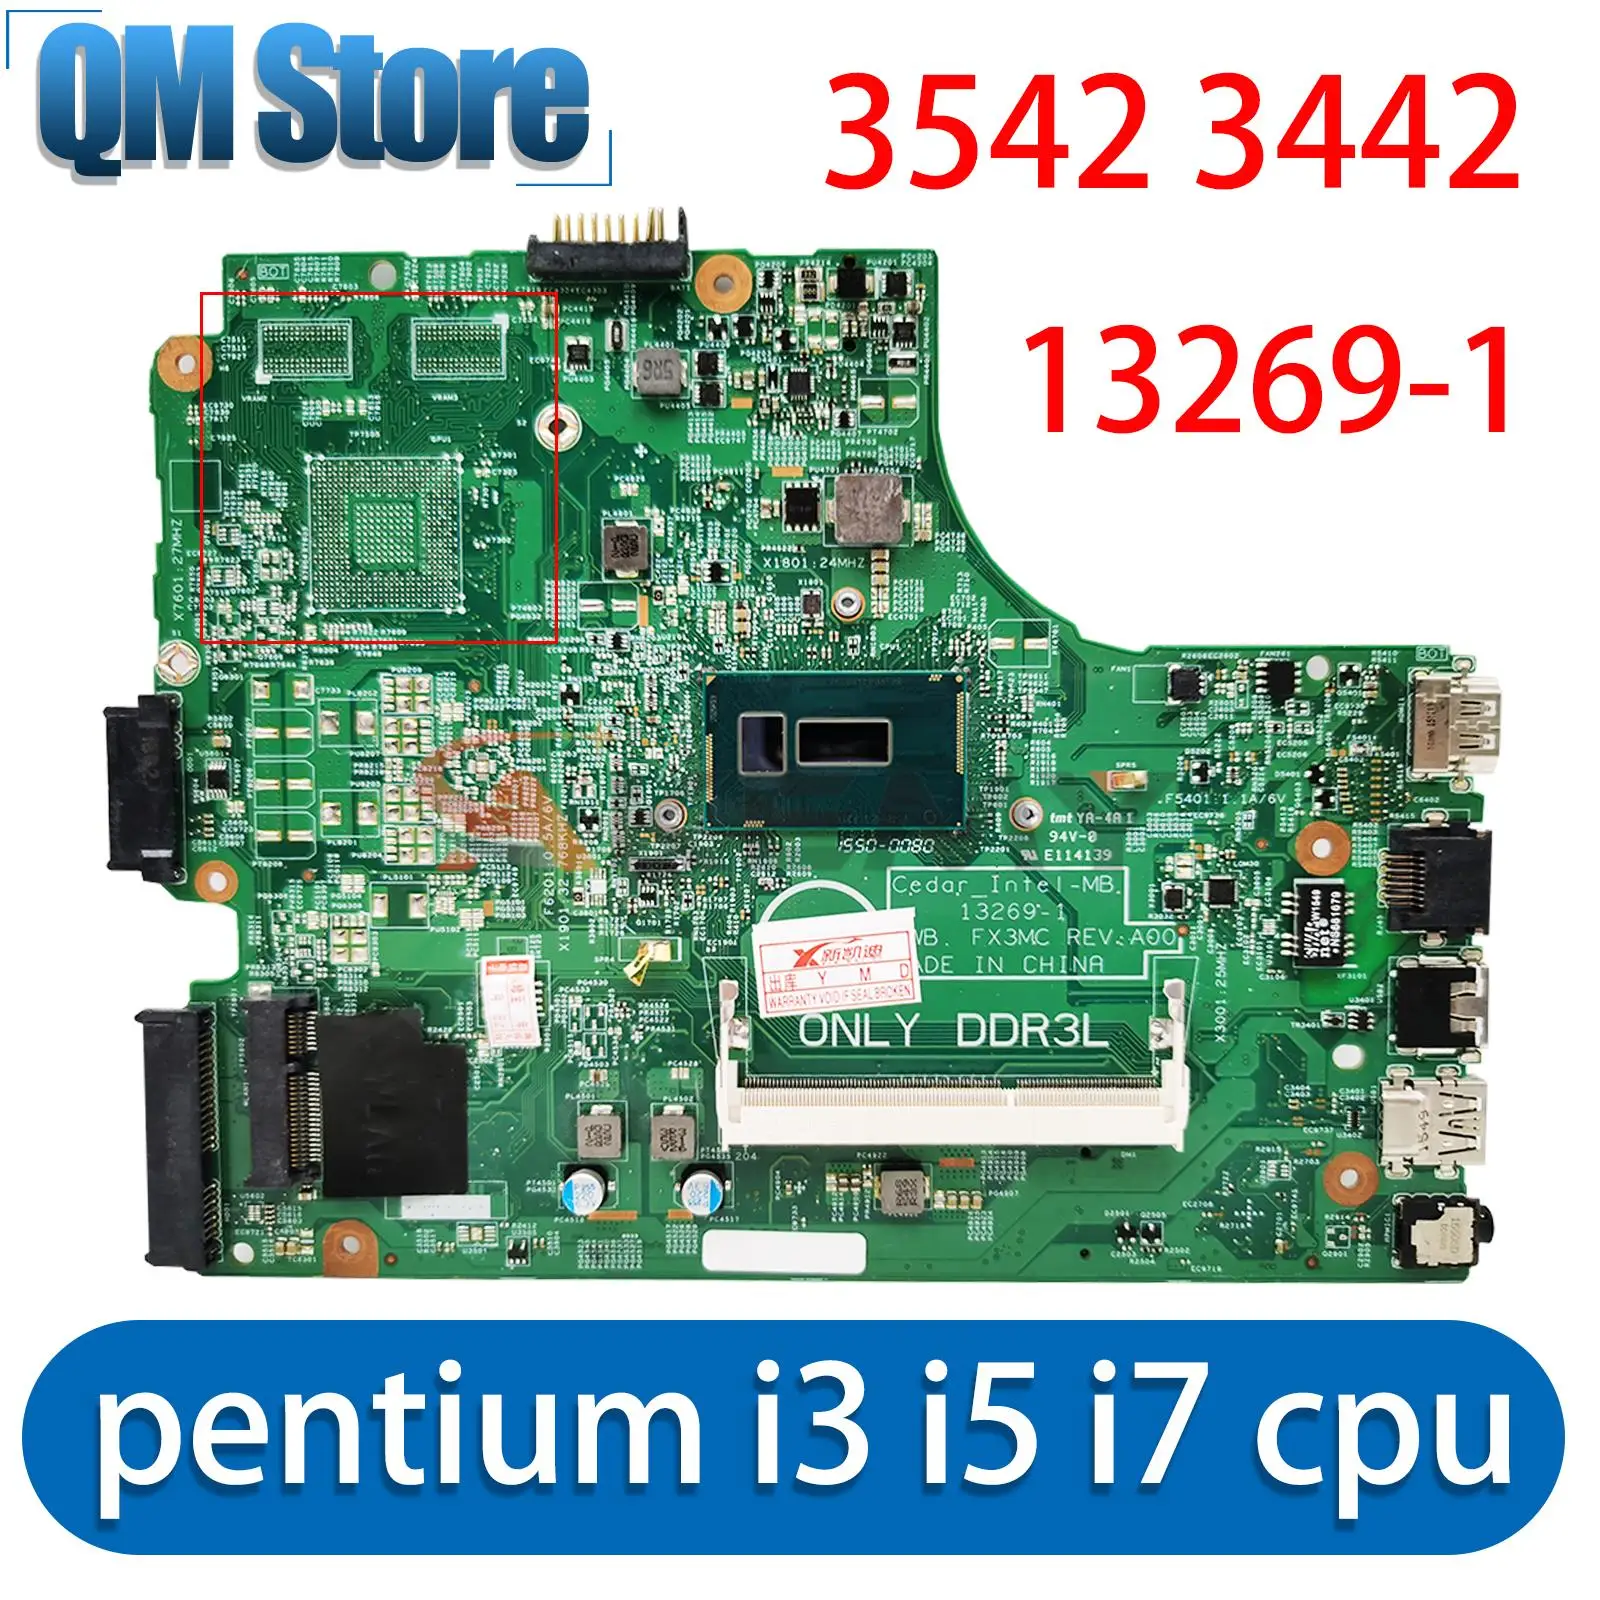 

For DELL inspiron 3442 3542 3443 5748 Laptop Motherboard 13269-1 with pentium cpu i3 i5 i7 4th Gen CPU CN-0HRG70 0THVGR GM